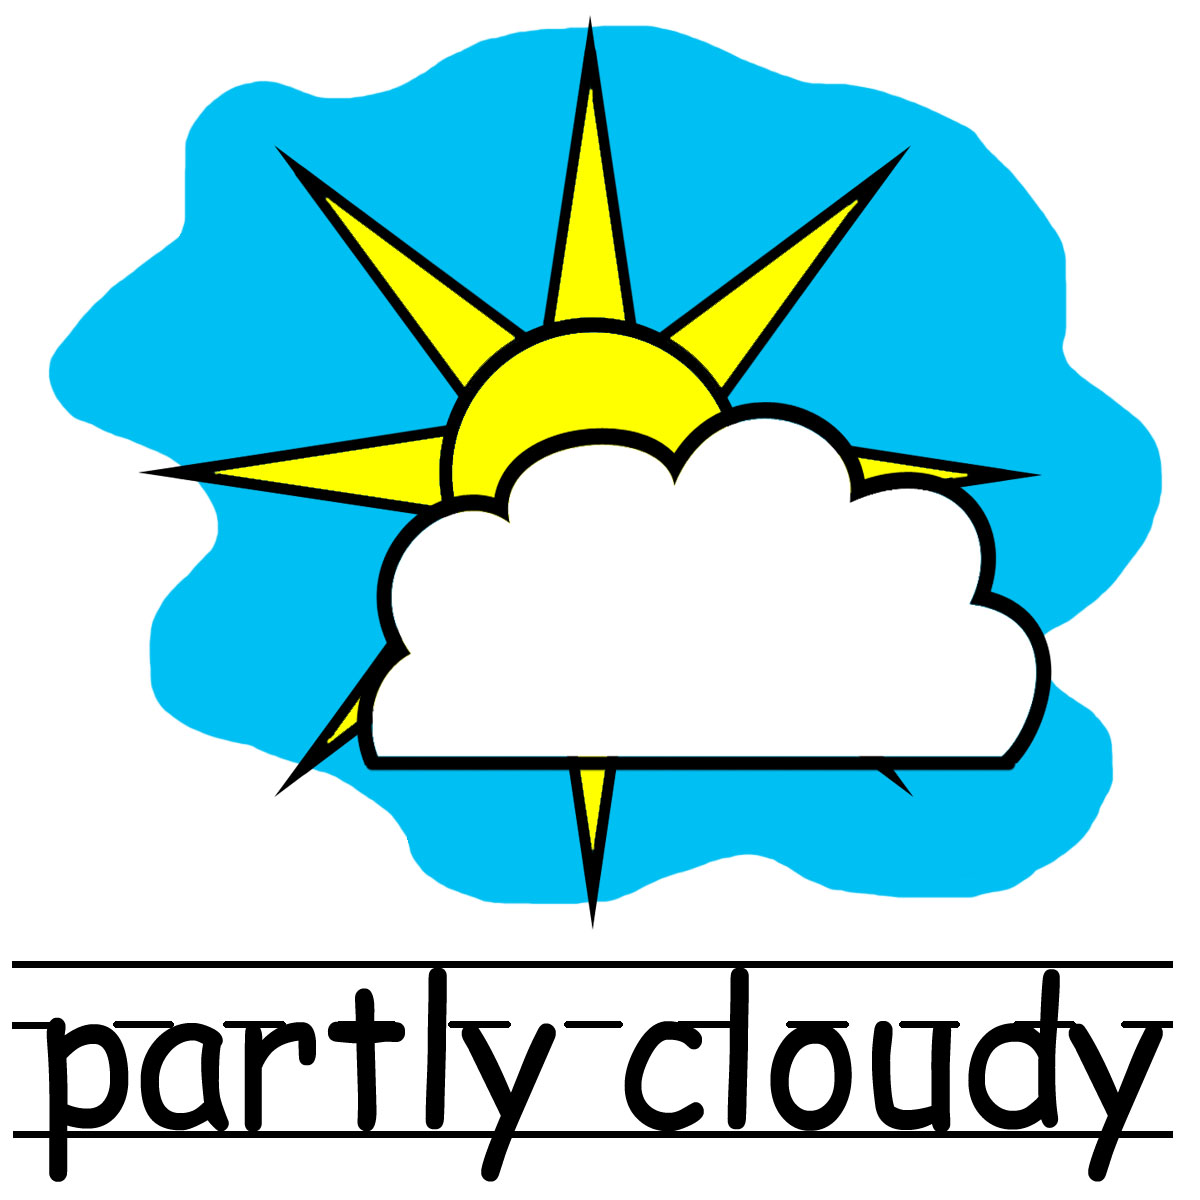 Weather Forecast Pictures Clip Art   Clipart Best